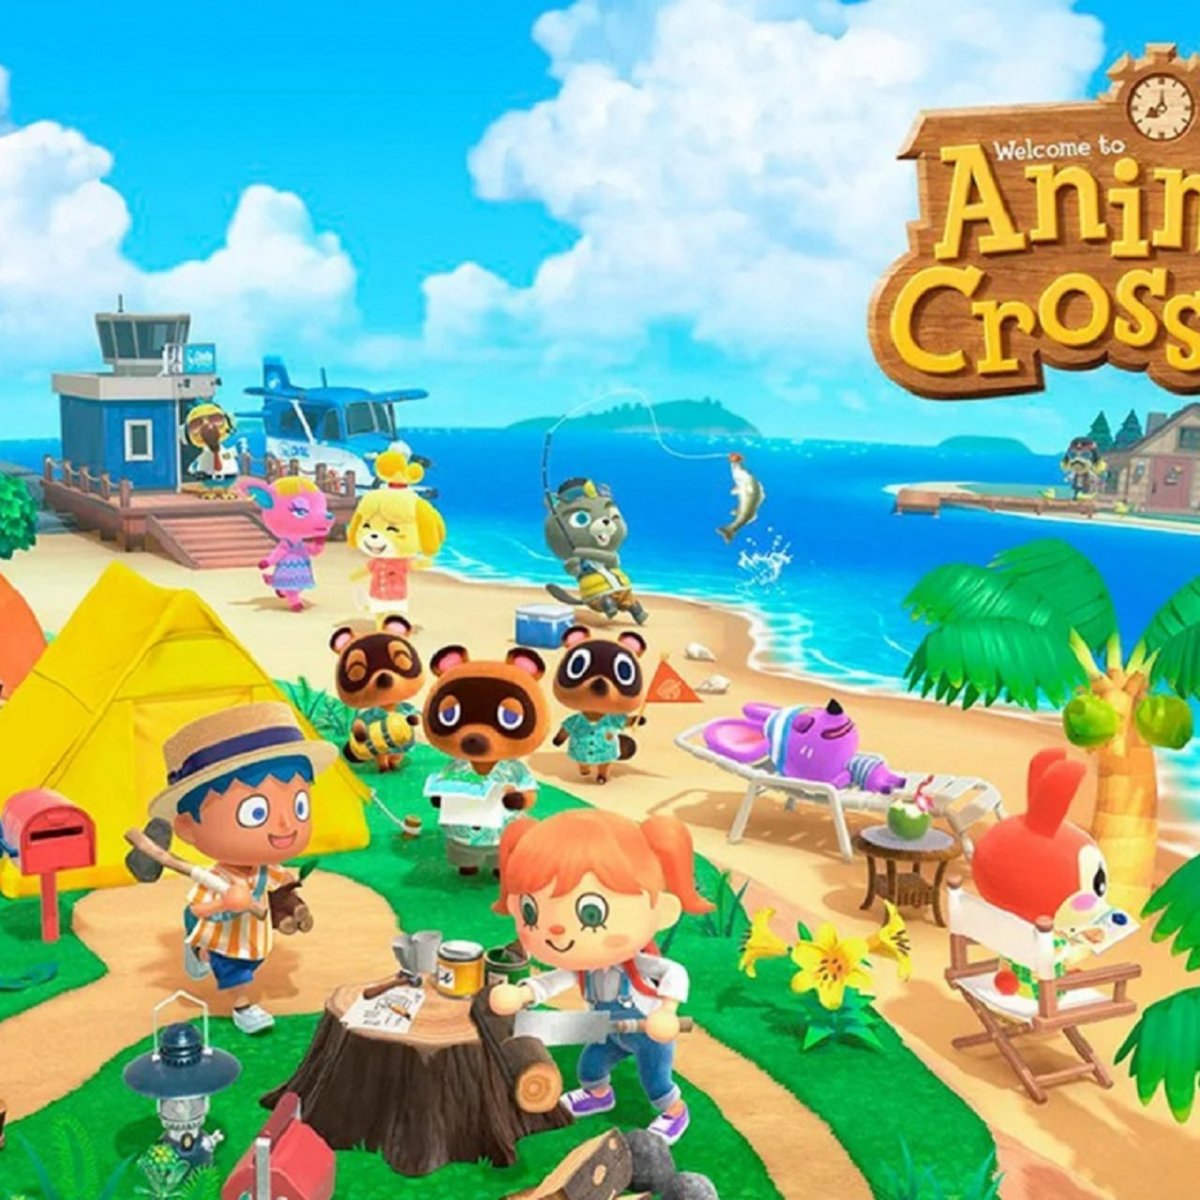 How to Play Animal Crossing on PC Without Switch: Easy Guide